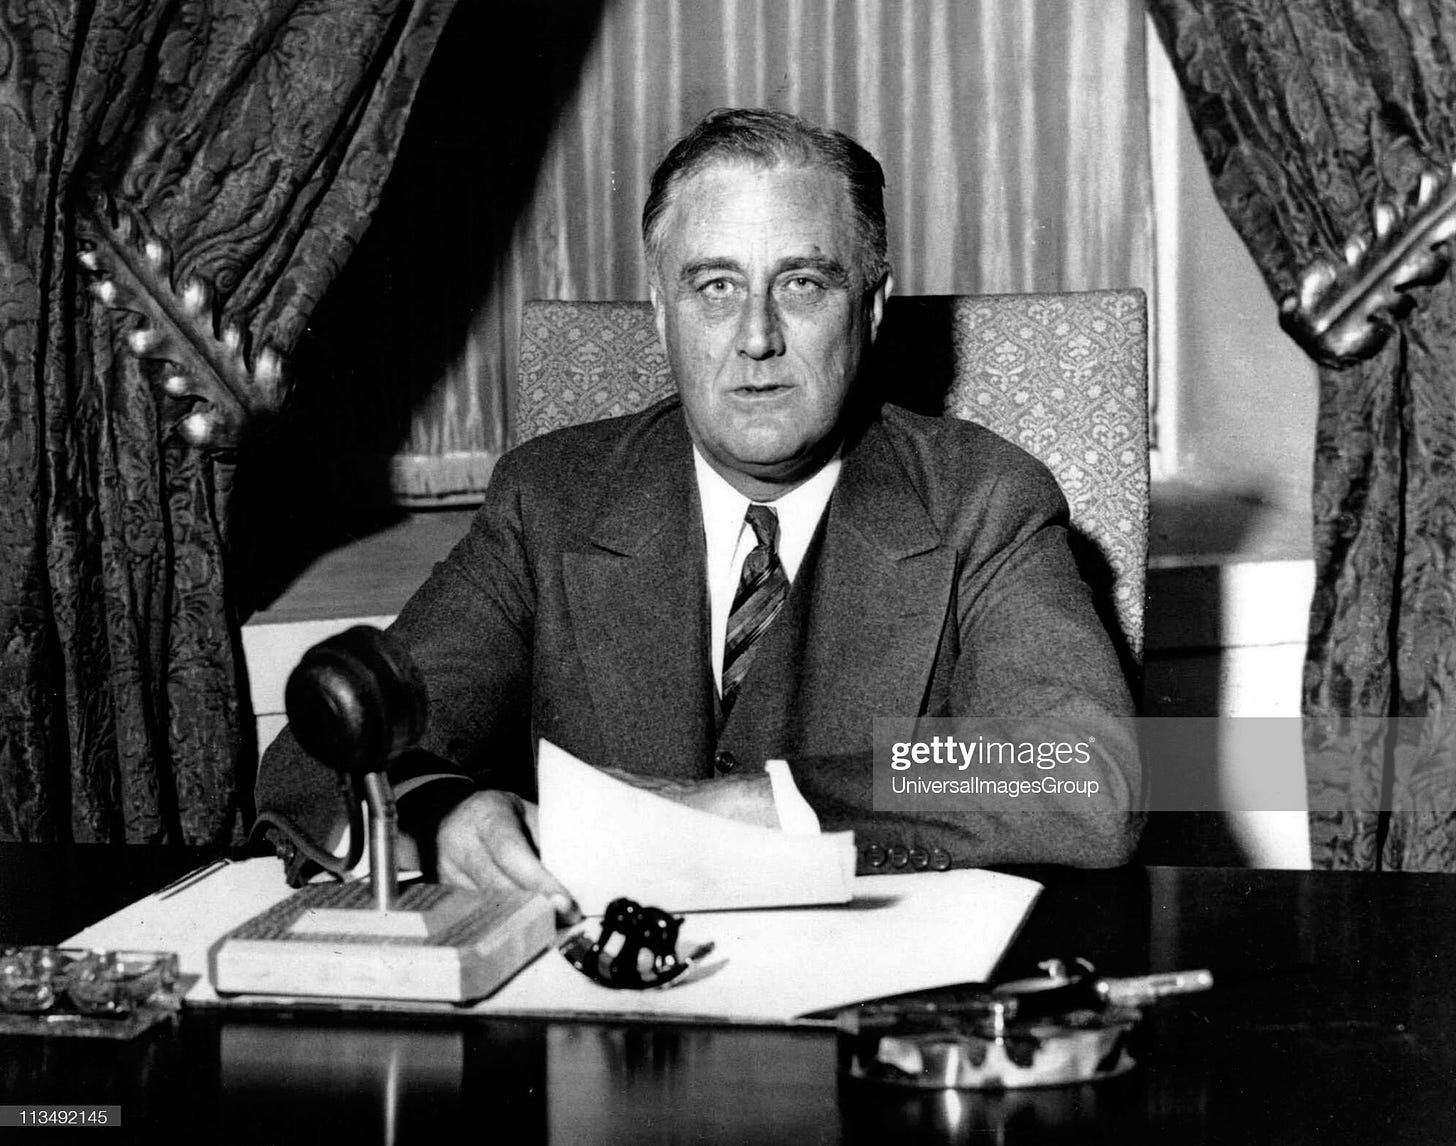 Franklin Delano Roosevelt , 32nd President of the United States of... News Photo - Getty Images